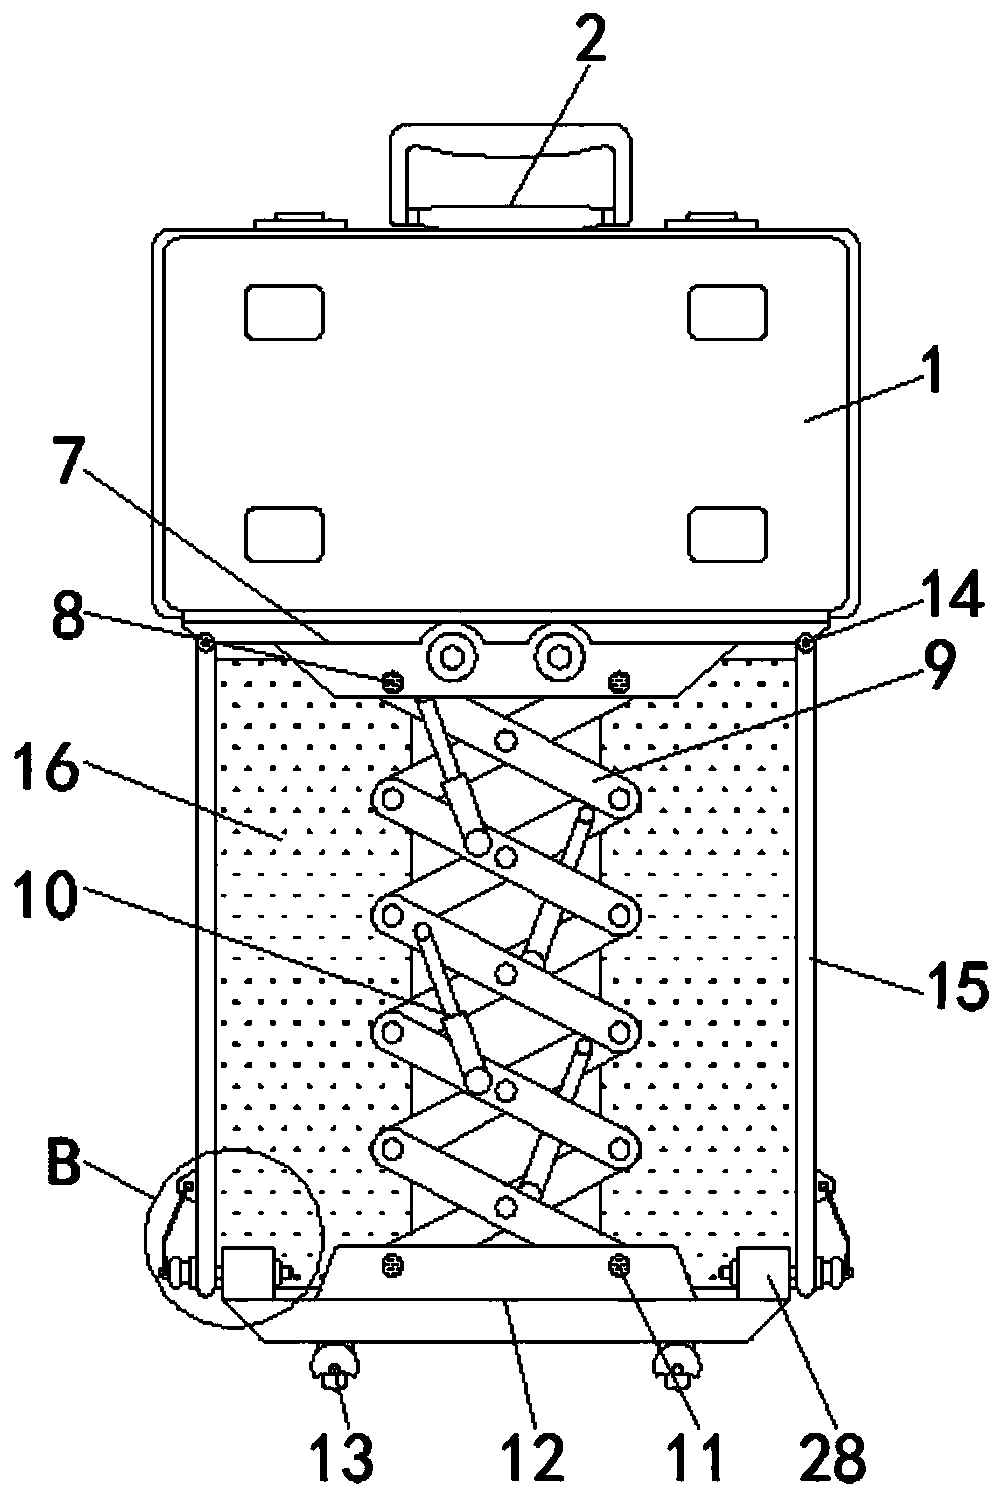 Intelligent fault monitoring device for power transmission and transformation